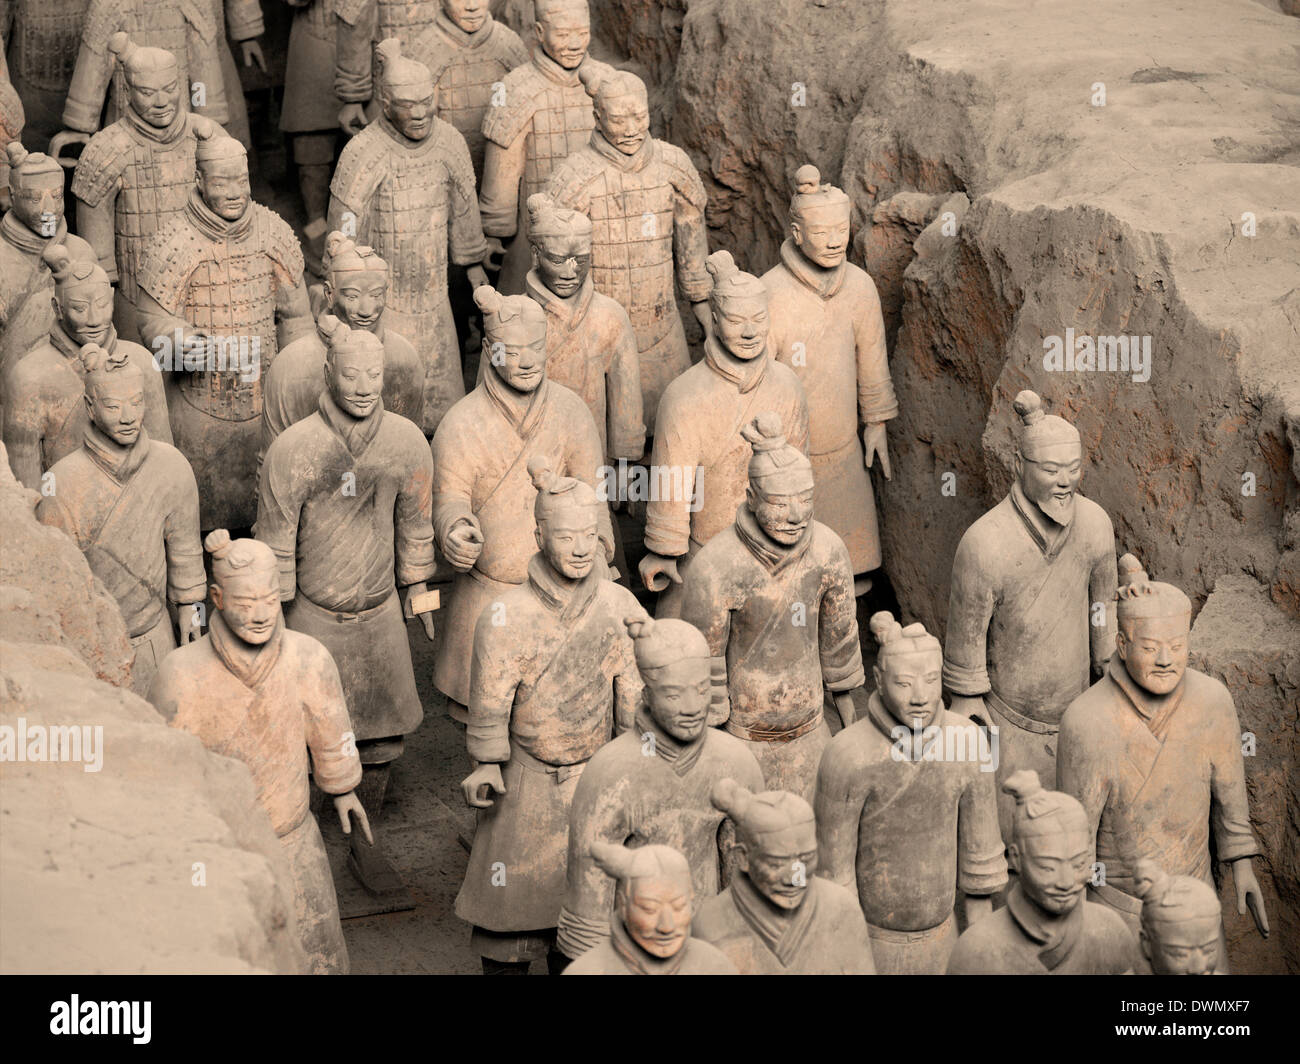 The Terracotta Army near the city of Xian in Shaanxi province in the People's Republic of China Stock Photo